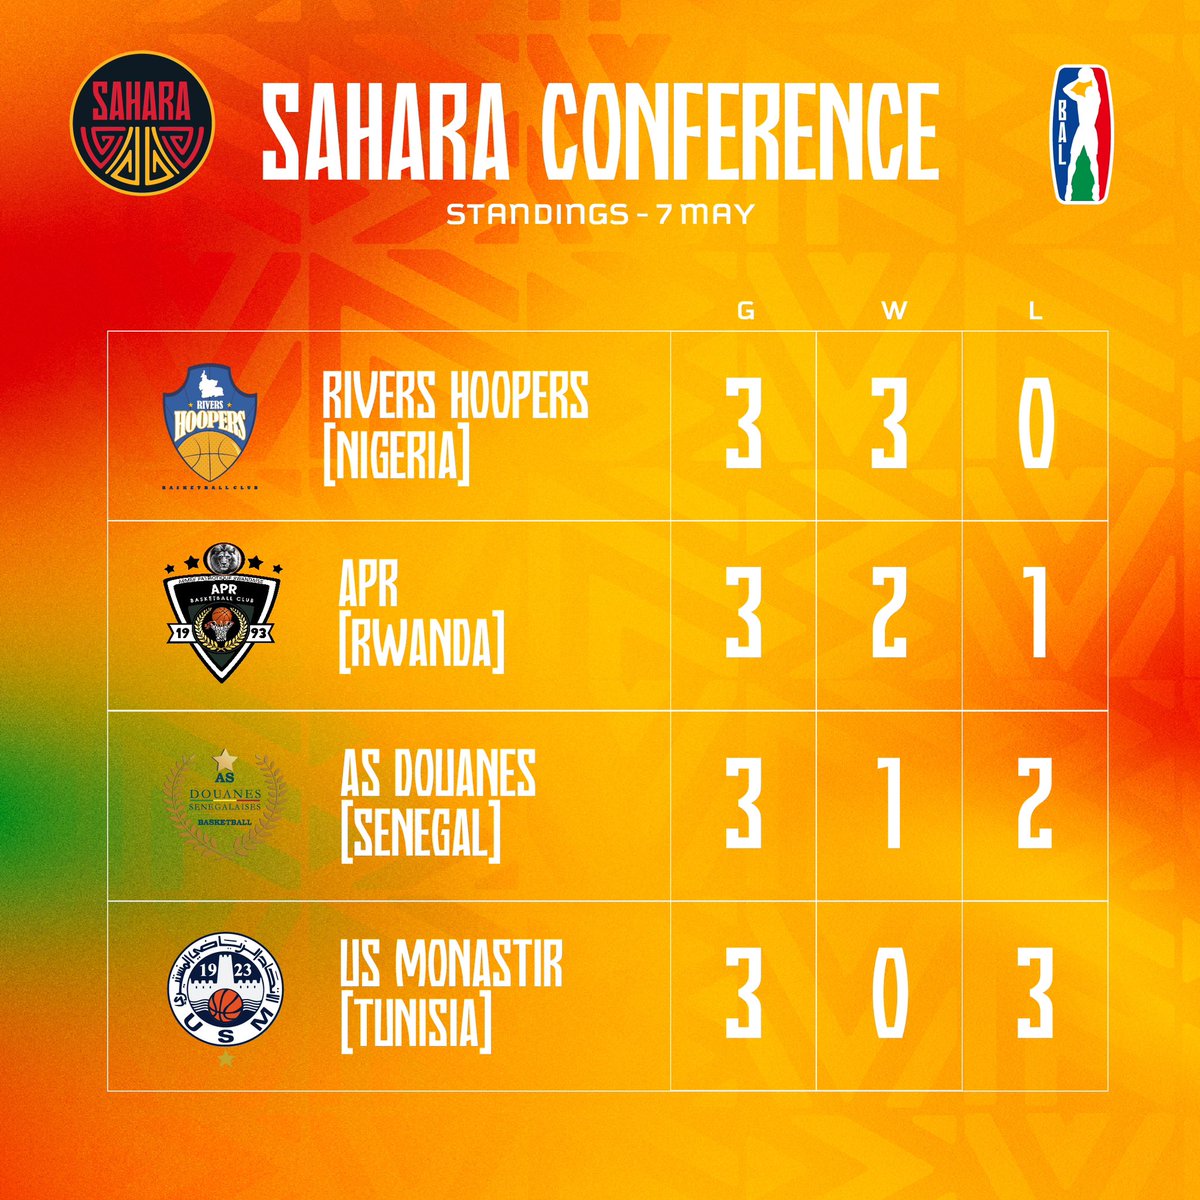 🏀📊 After the first leg of Sahara Conference games, here are the standings. With 3️⃣ games remaining for each team, the competition for BAL Playoffs is wide open. Anything can happen until this Sunday! #BAL4